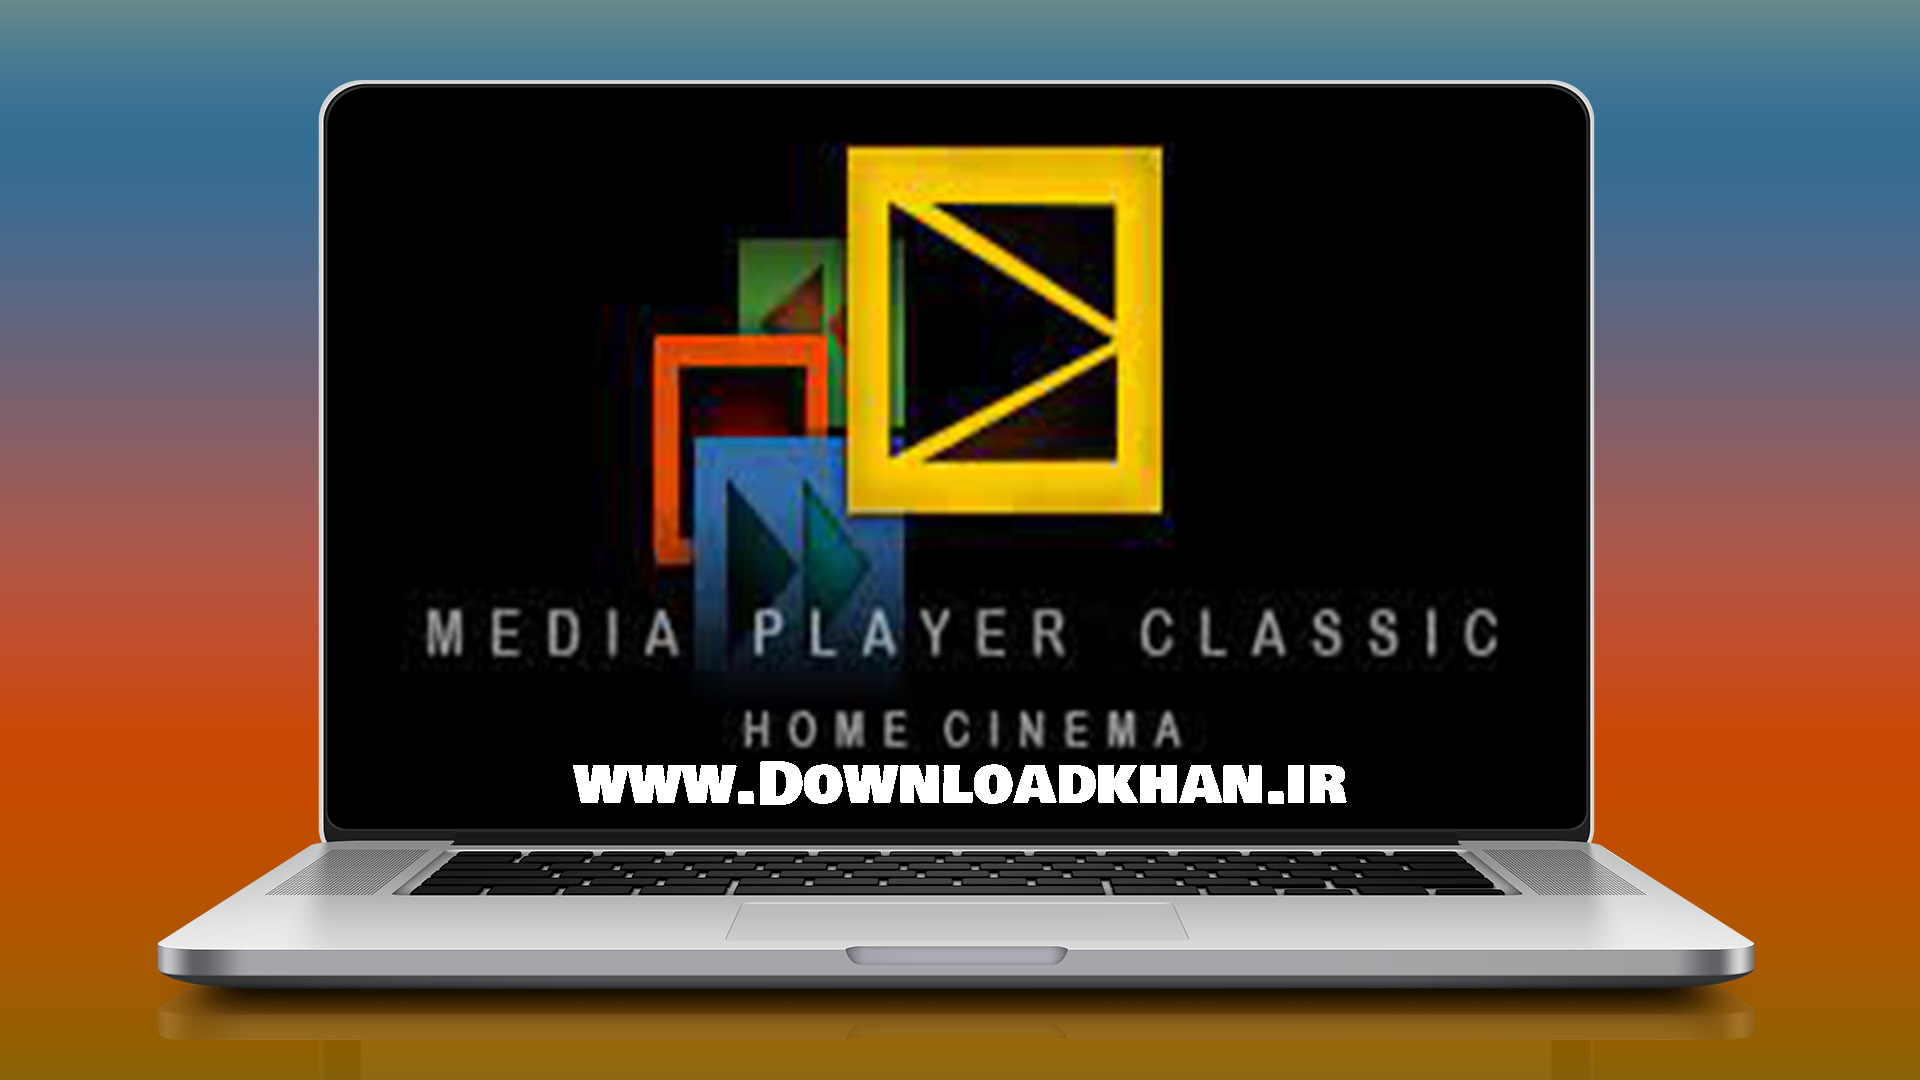 Media Player Classic Home